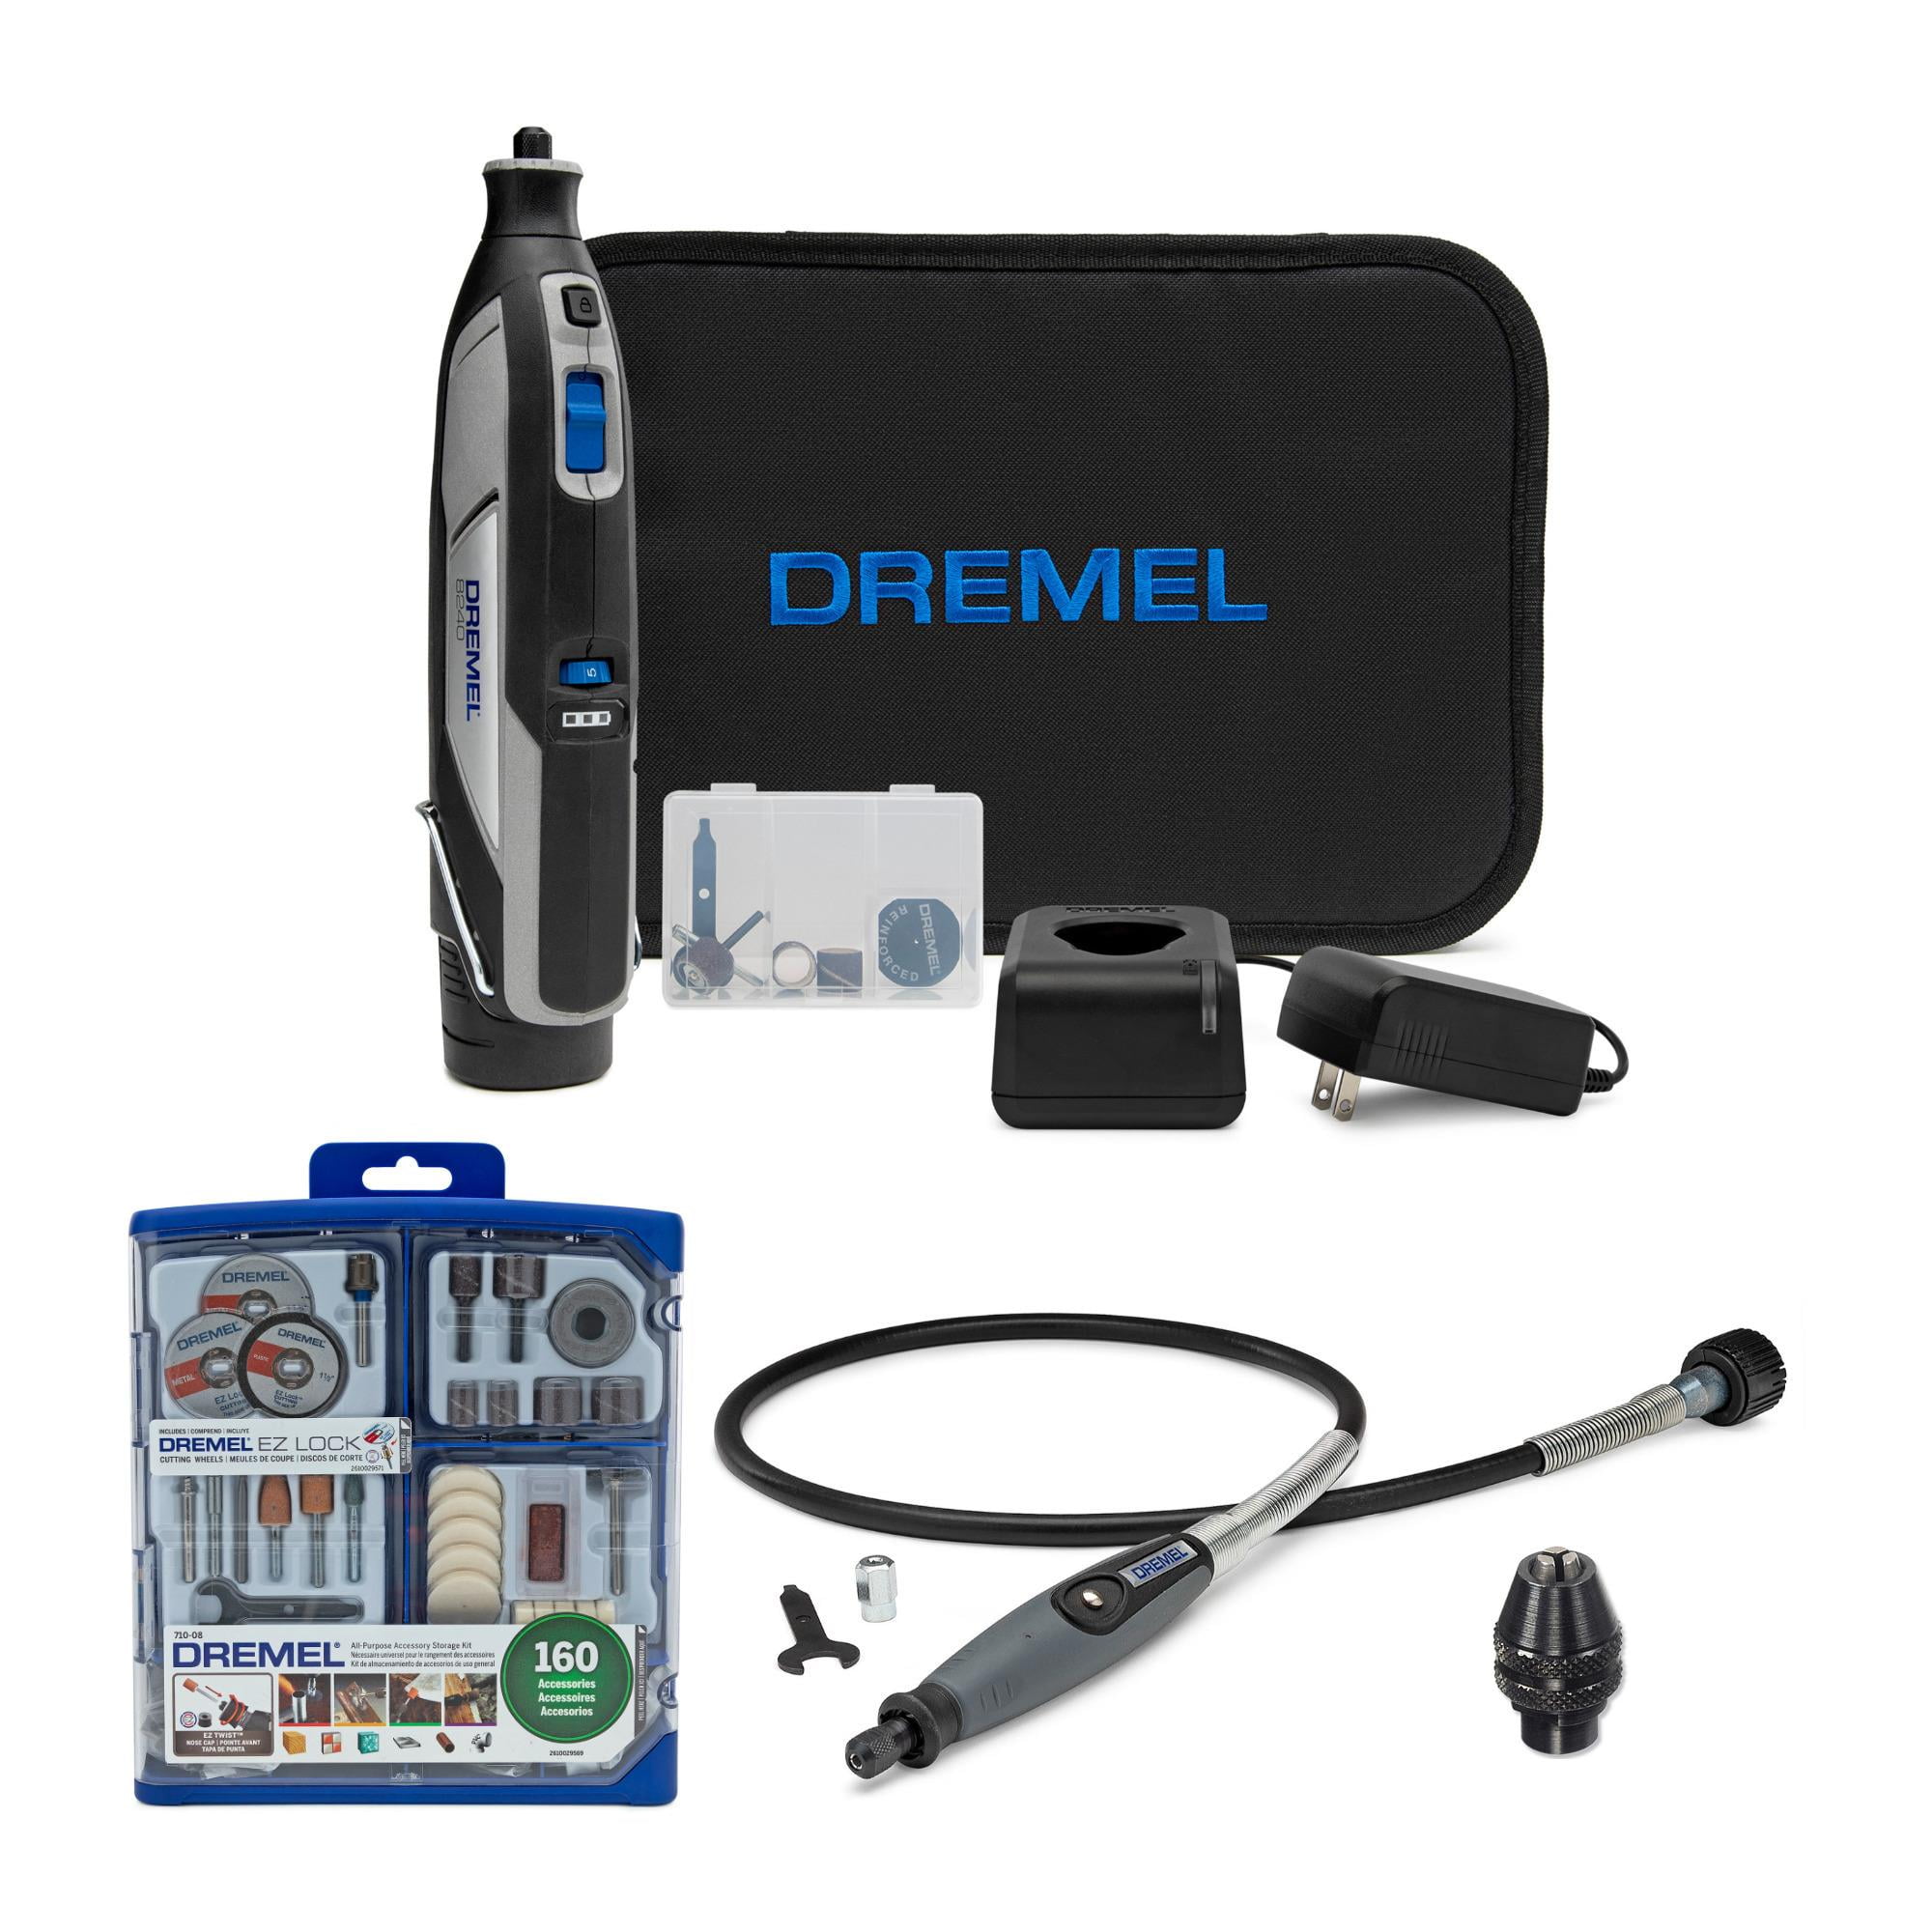 Dremel 8240 12V Lithium-Ion Battery Cordless Rotary Tool with